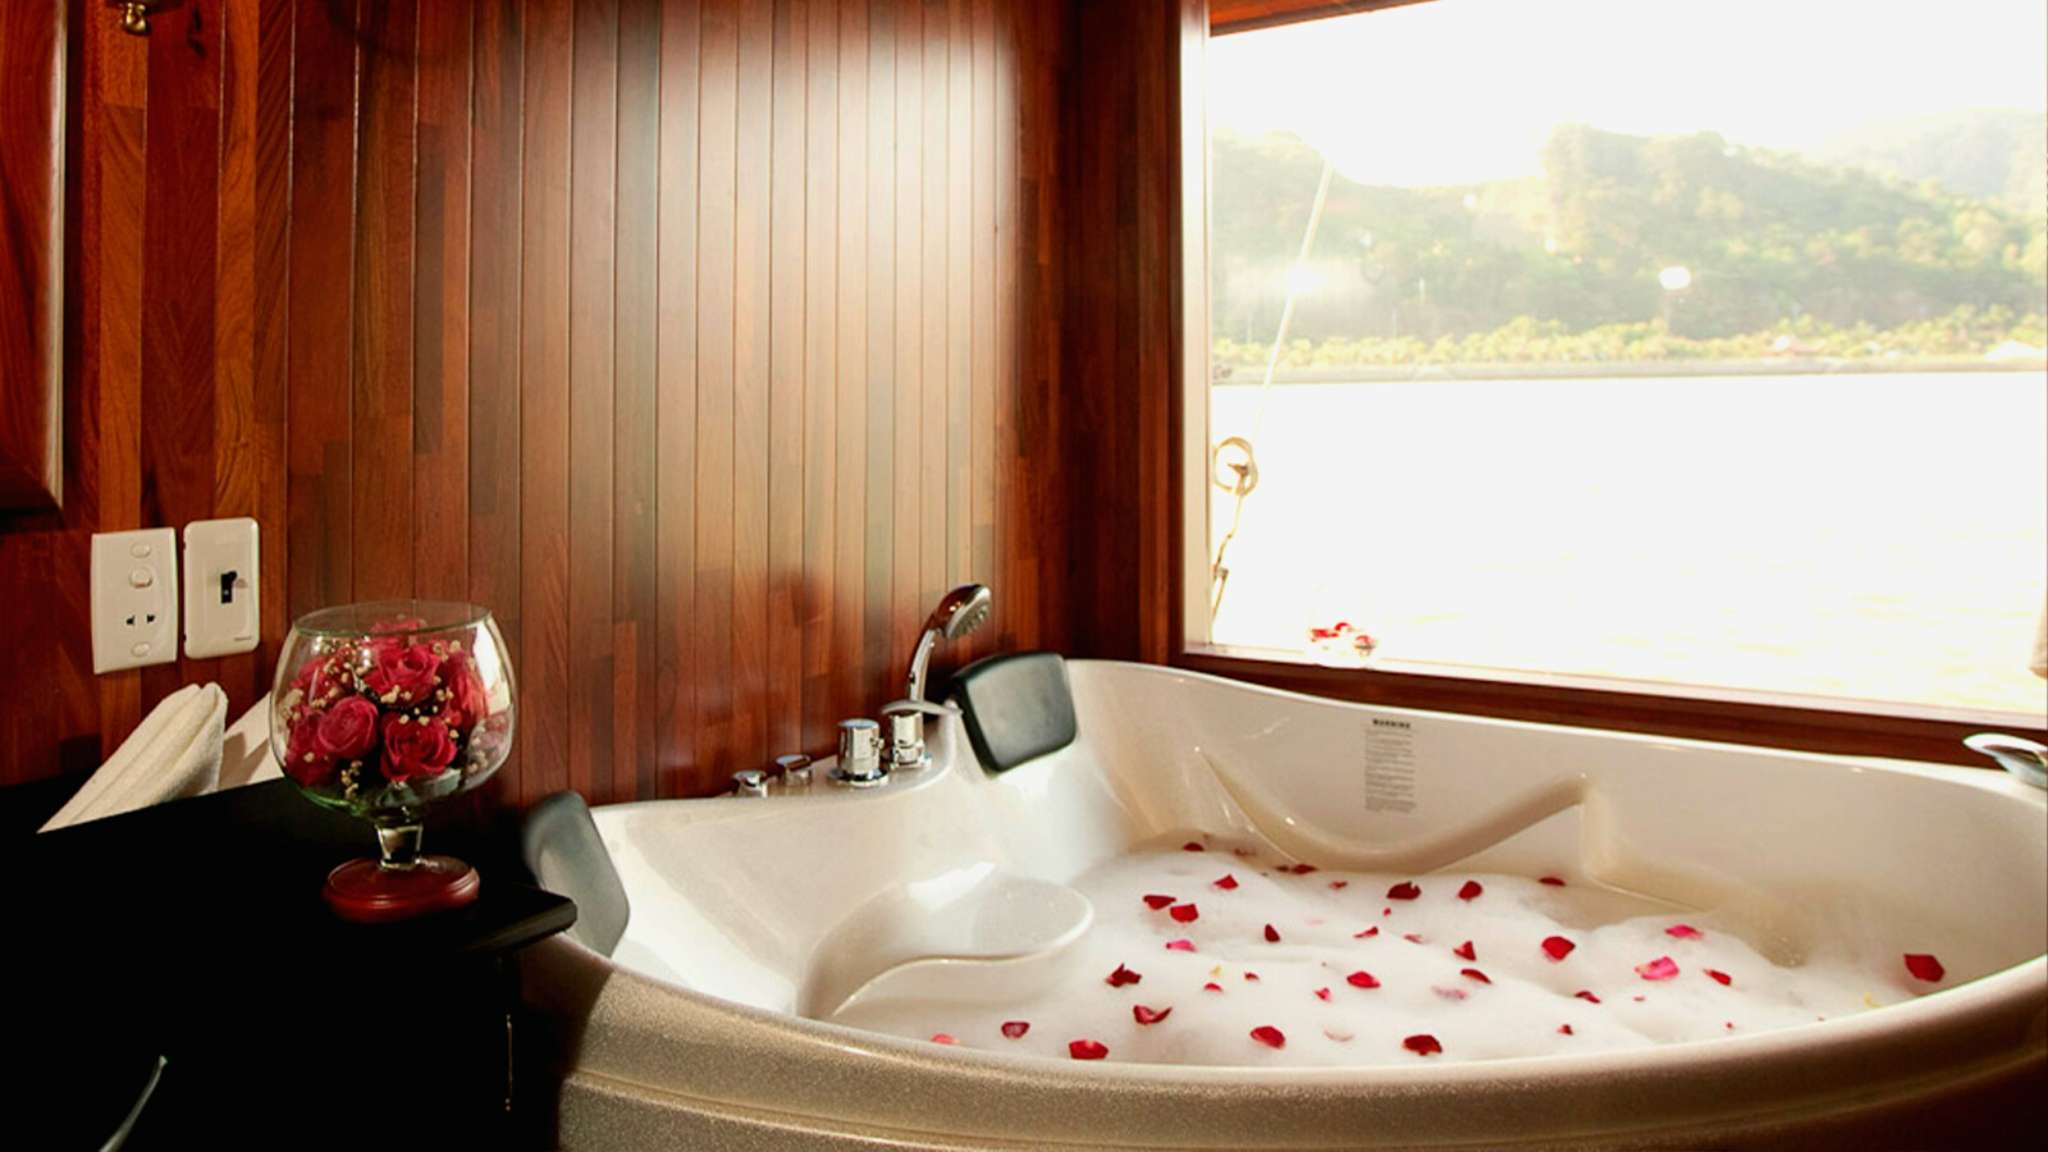 Comfortable Bathtub For Relaxation